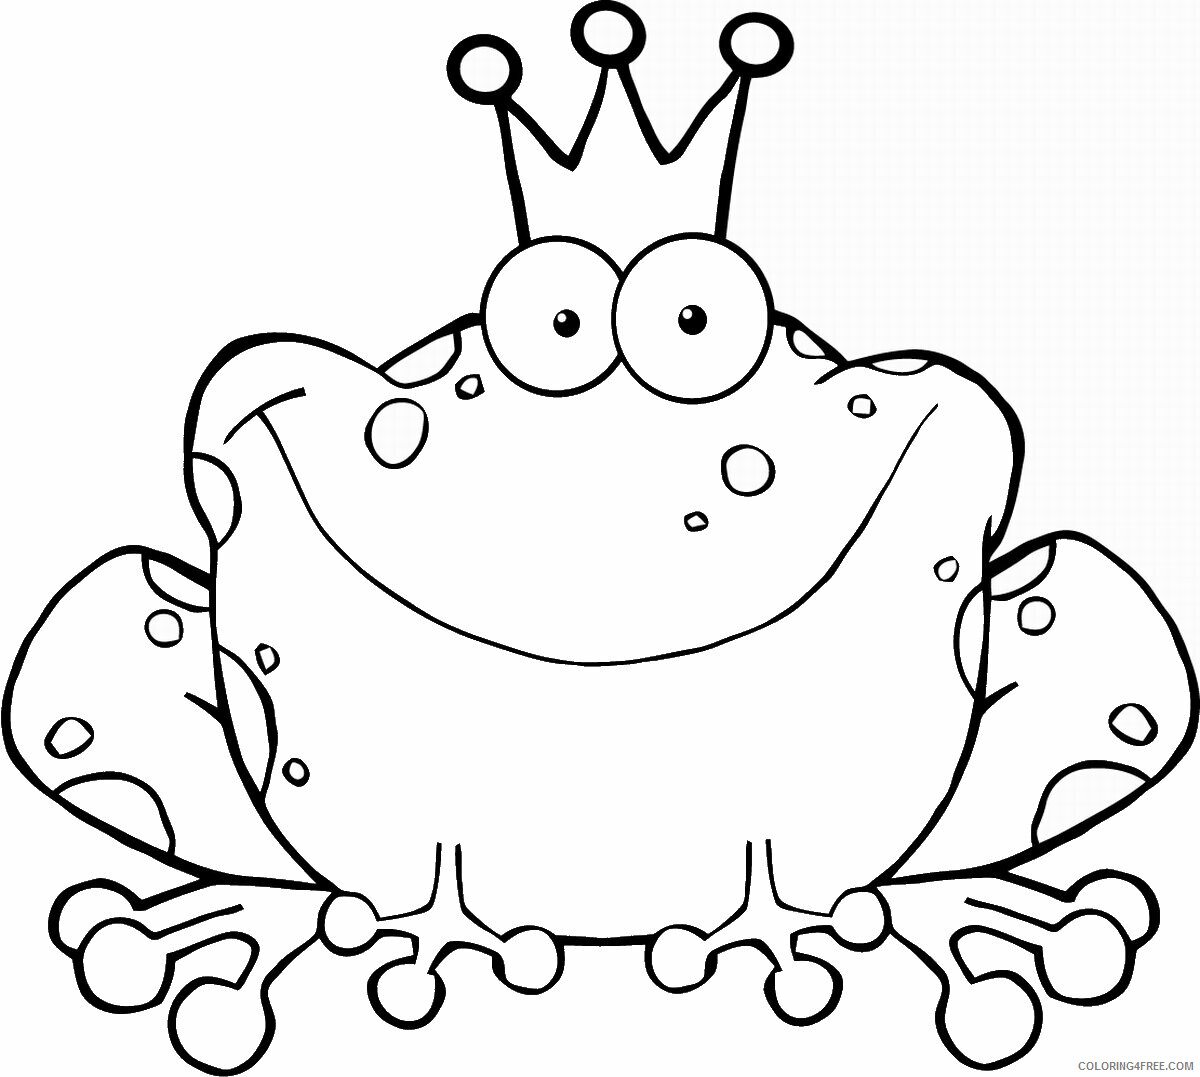 Frog Coloring Pages Animal Printable Sheets frog_cl_23 2021 2293 Coloring4free